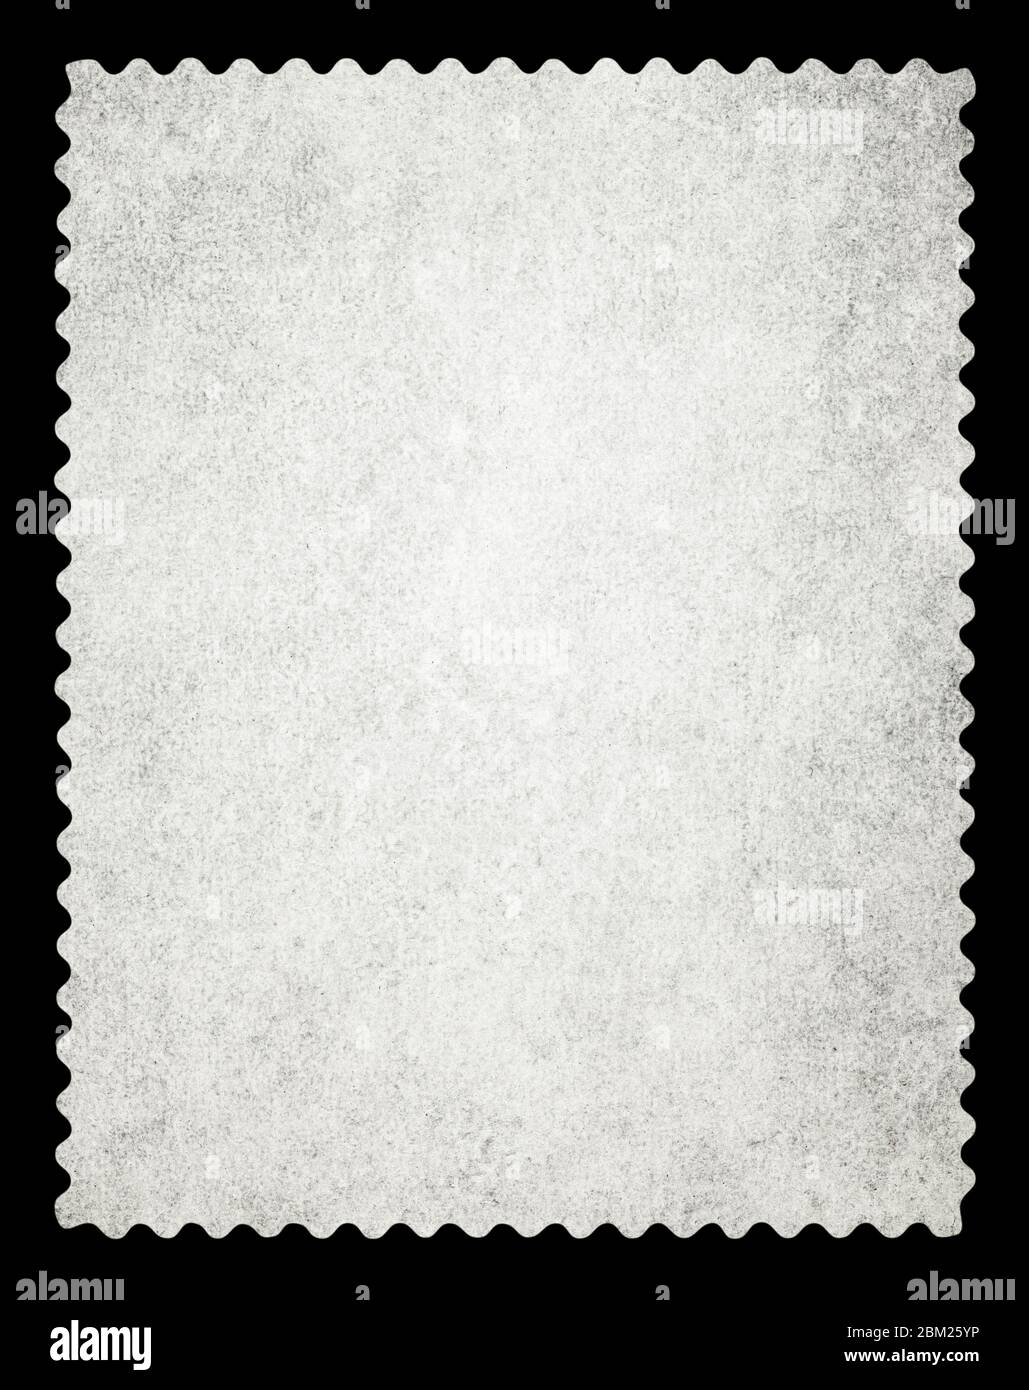 Blank postage stamp - Isolated on Black background Stock Photo